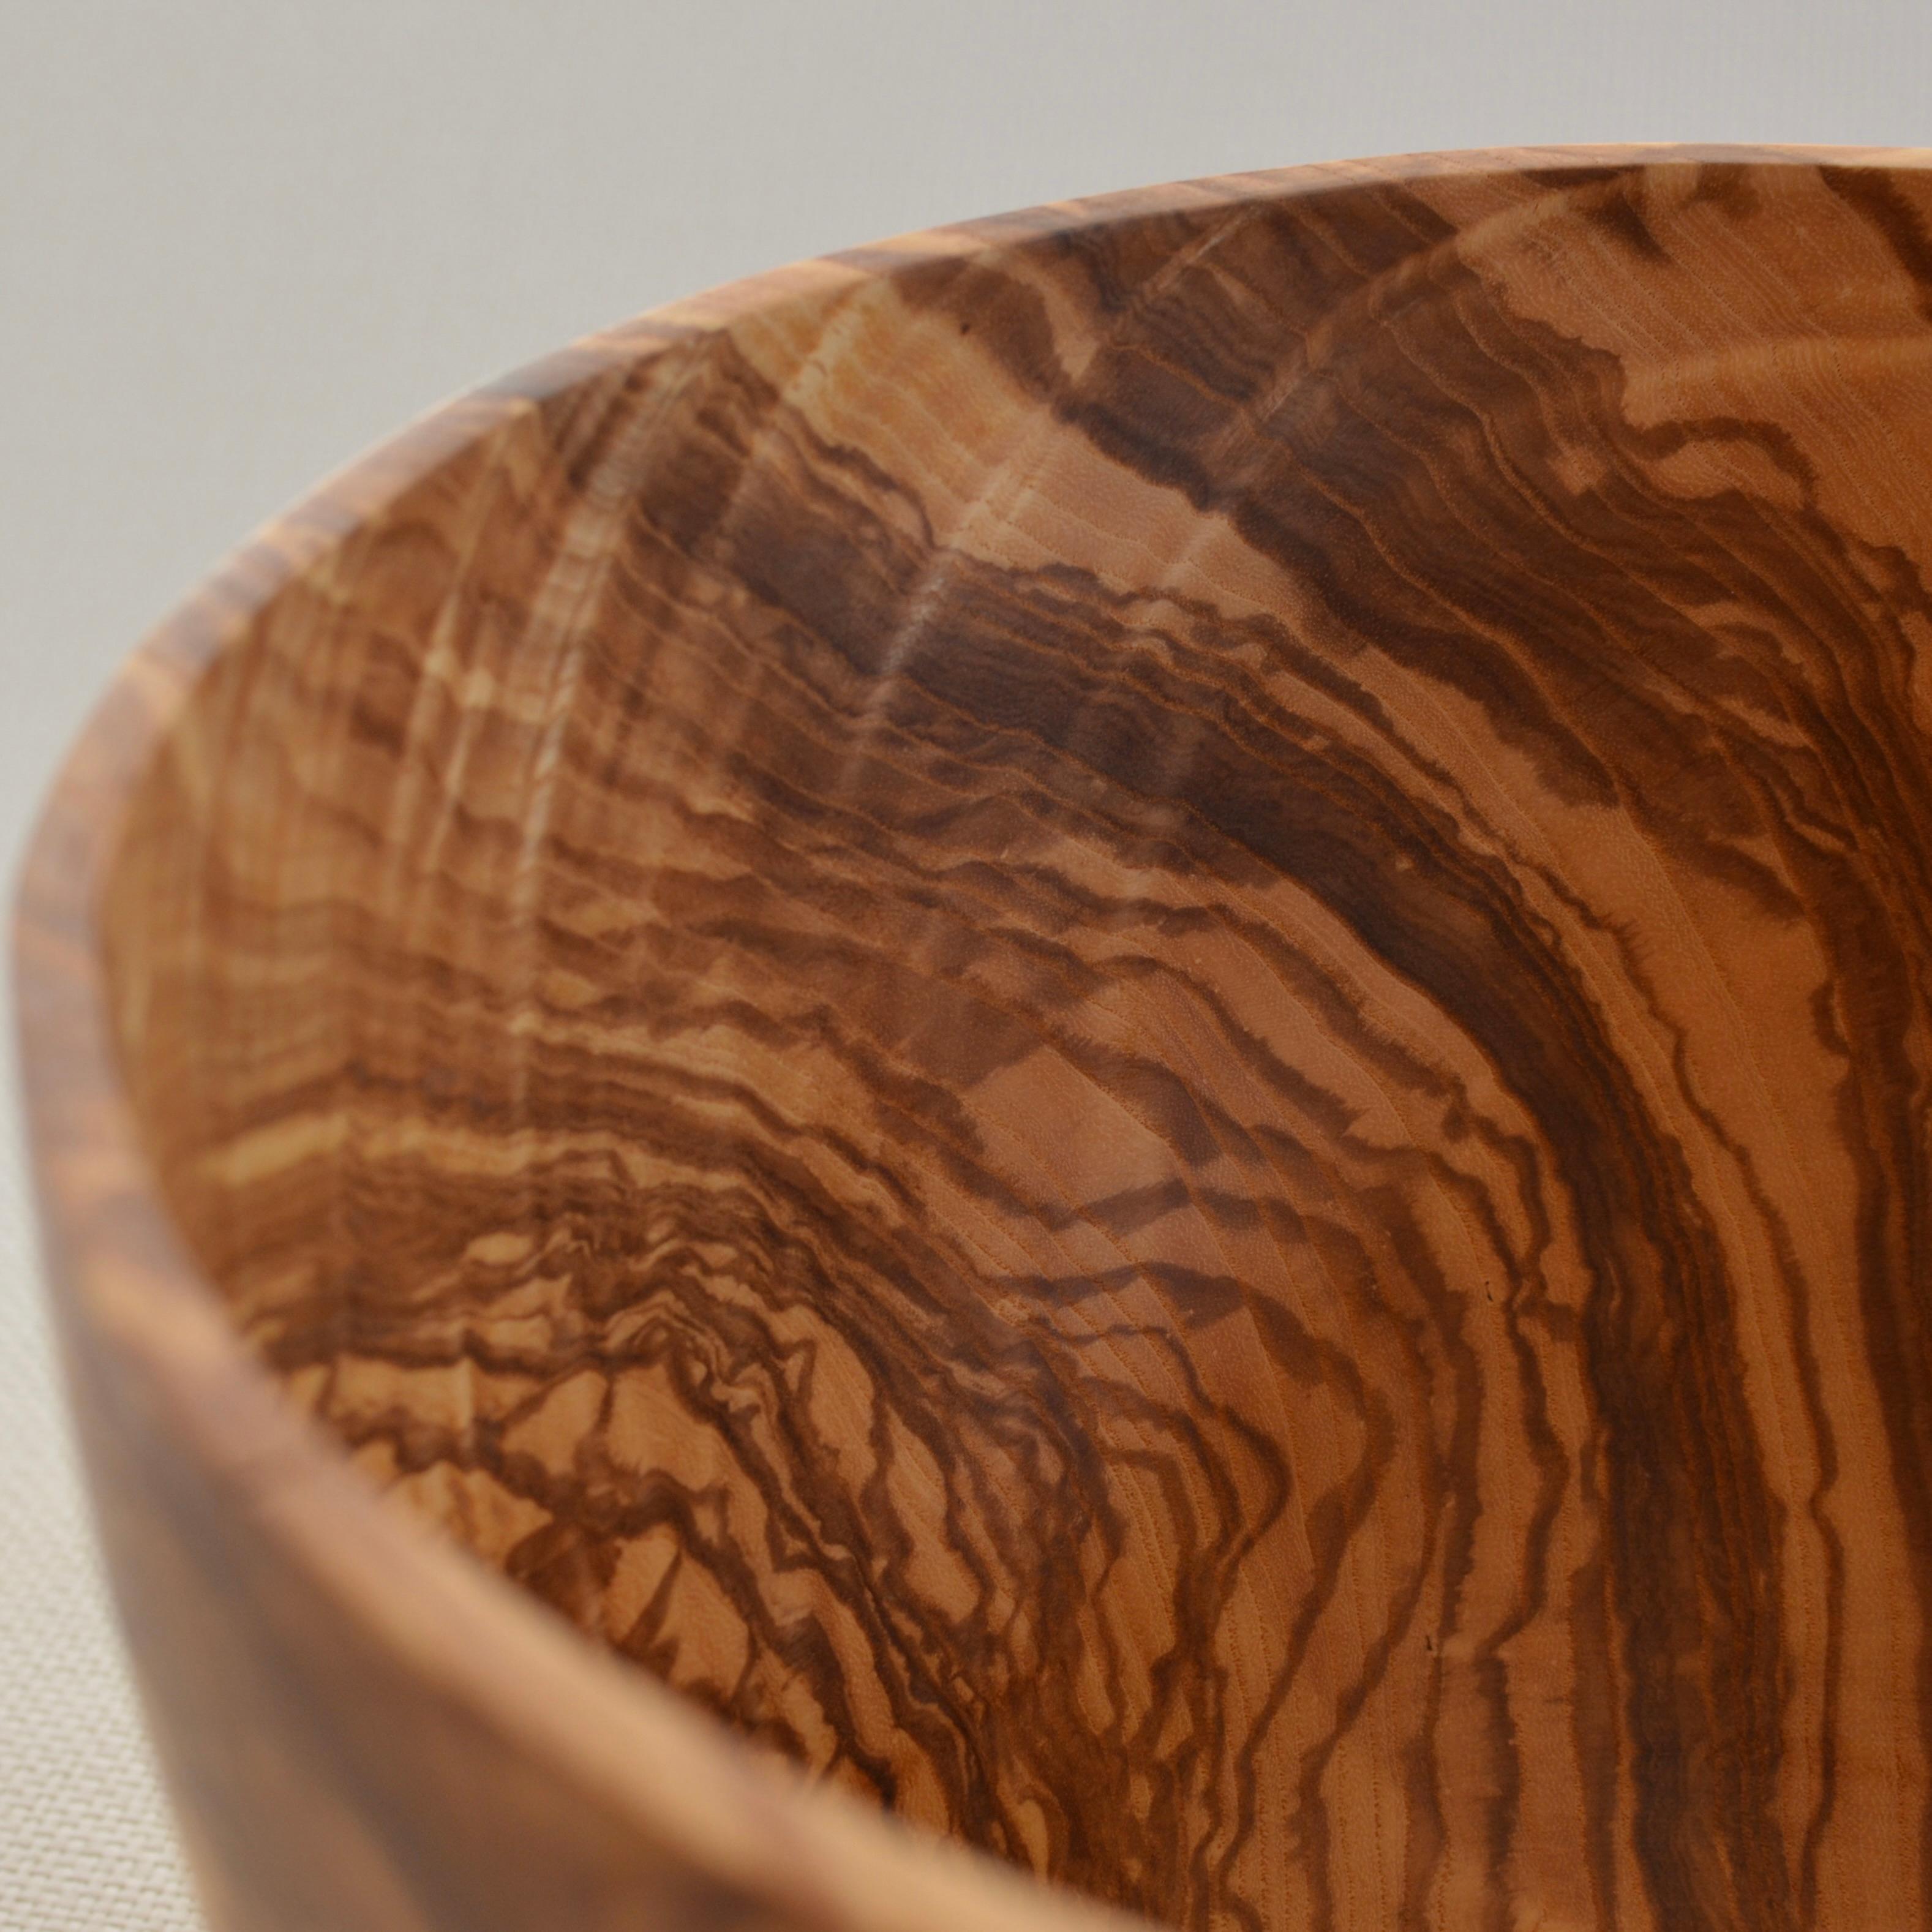 American Hand-Carved Natural Ash Wood Bowl with Staple Details For Sale